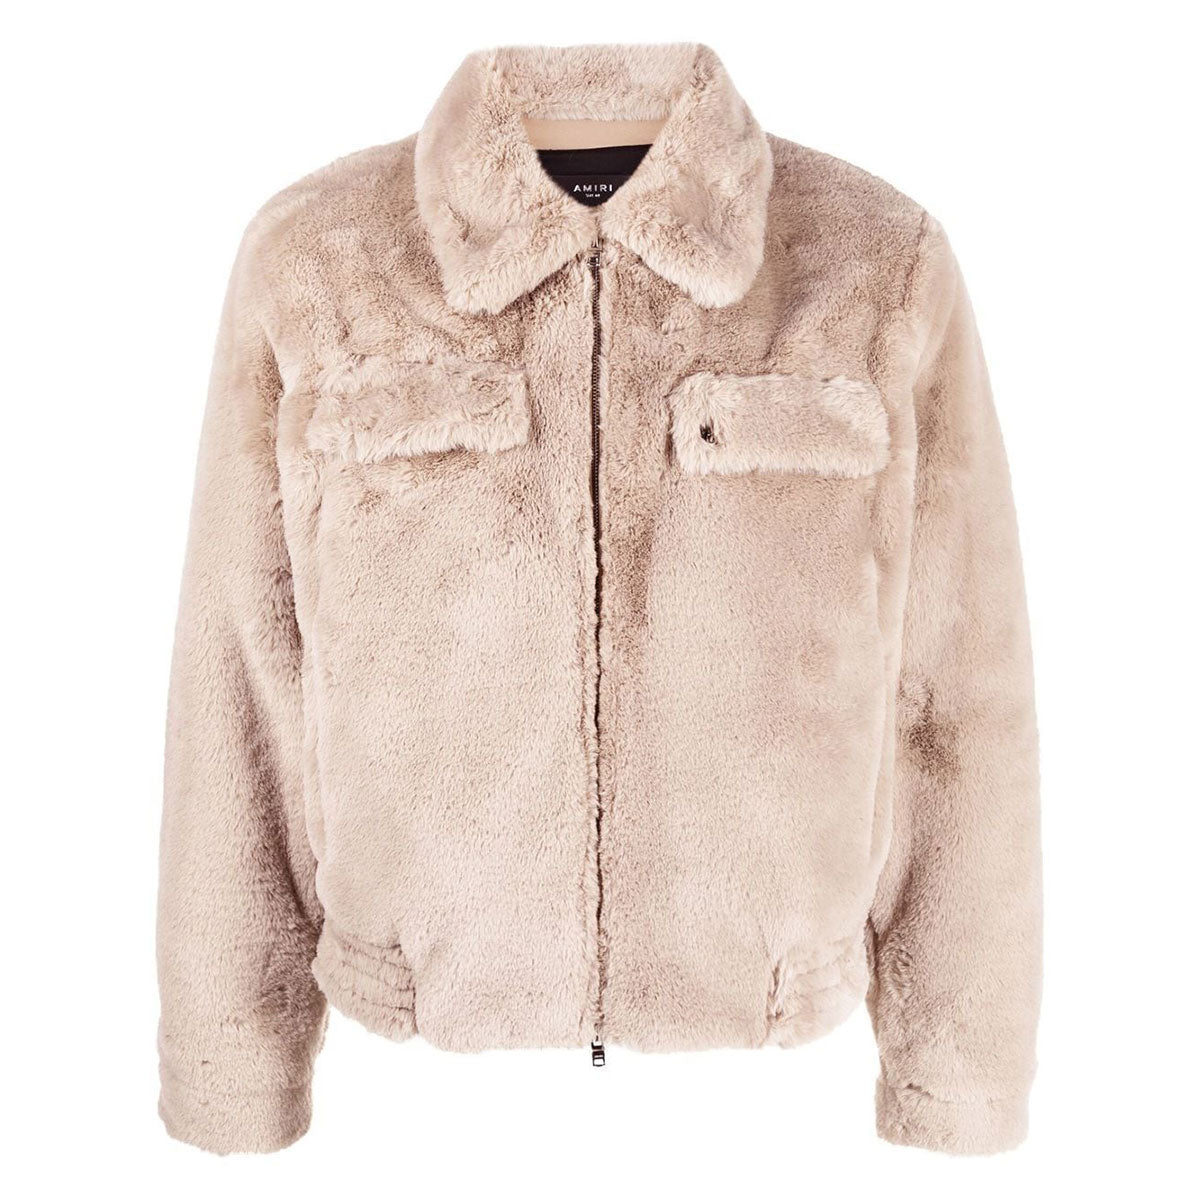 FAUX FUR ZIP BLOUSON - Why are you here?